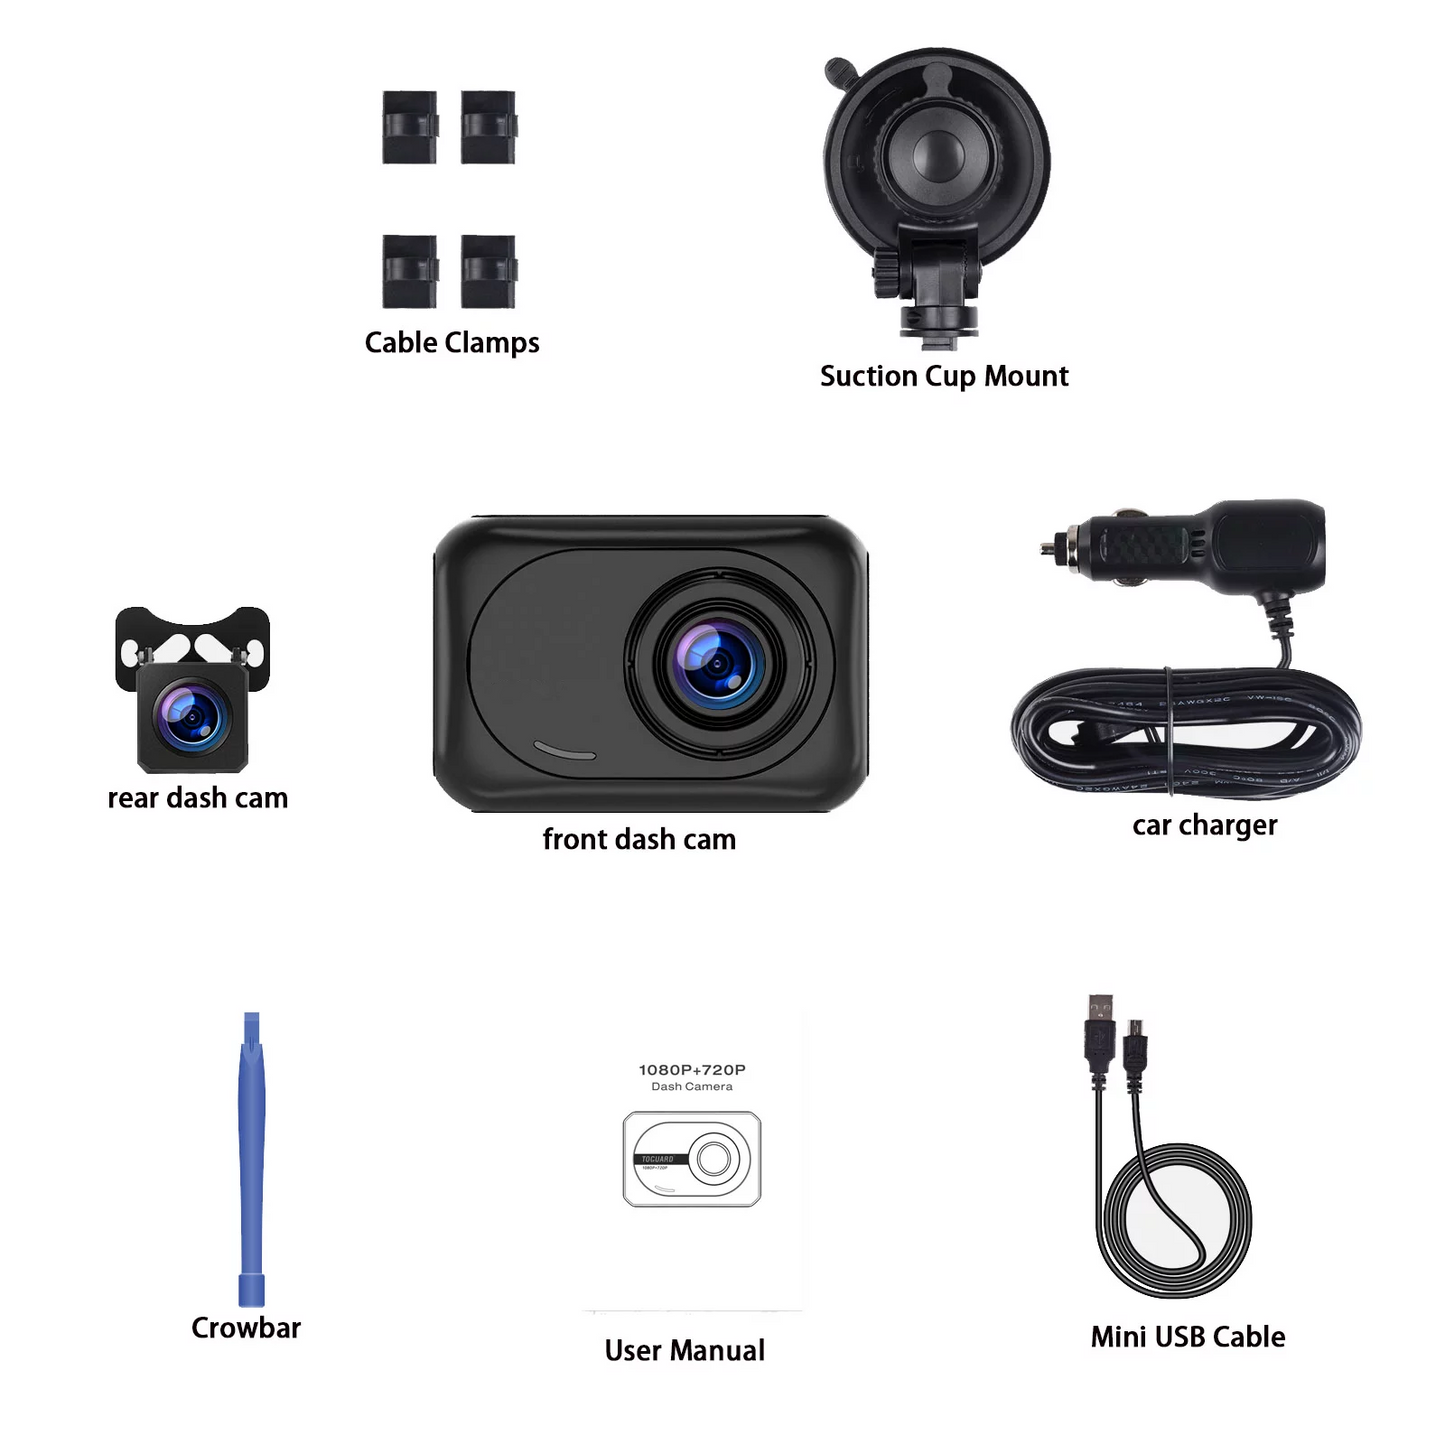 TOGUARD Dash Cam Front and Rear 1080P Full HD Car Camera,2.45 inch Dash Camera with 64GB SD Card, Super Night Vision, Parking Mode, G-Sensor, Loop Recording, WDR